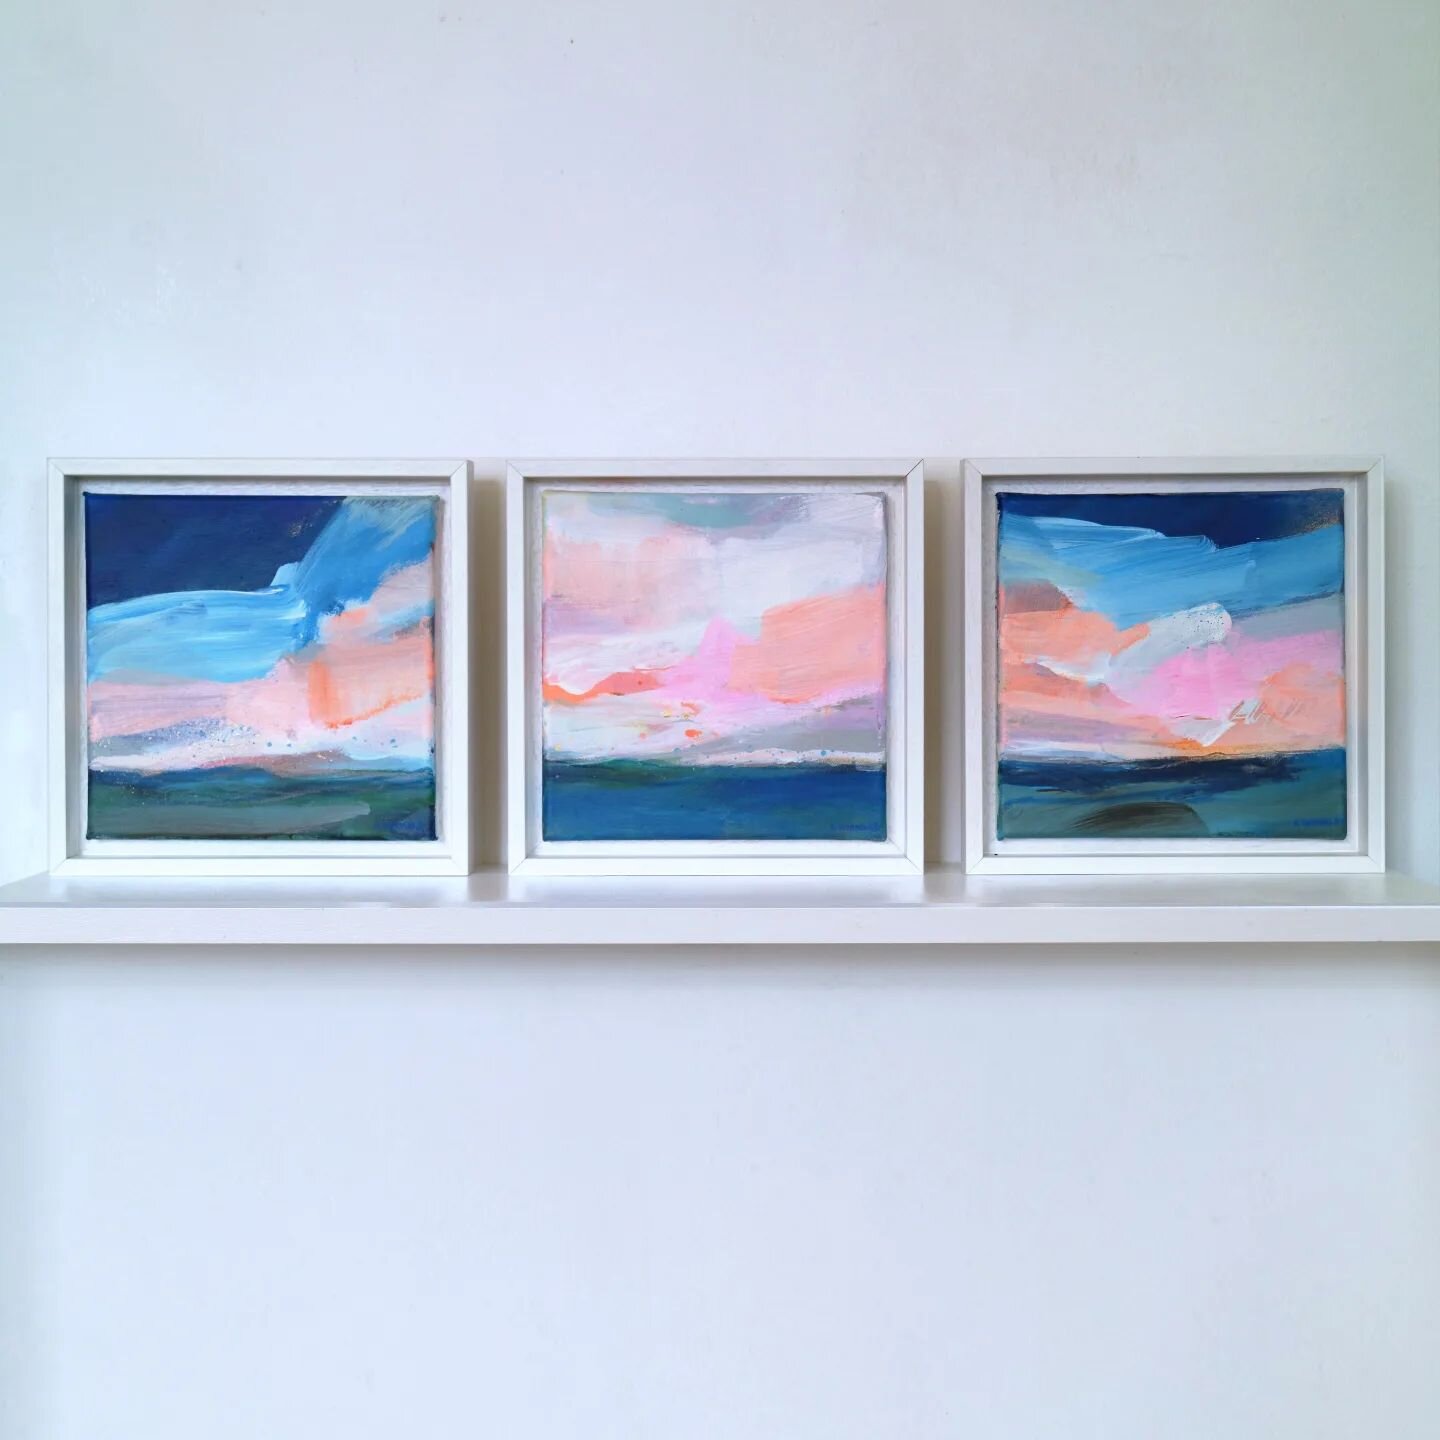 Last month I updated my website and I'm super pleased with it as I now have a proper online shop🛍️

I've just added a new triptych to the shop. This bright and bold set of 3 canvases are framed and ready to find a new home. Each canvas is 20 x 20cm.